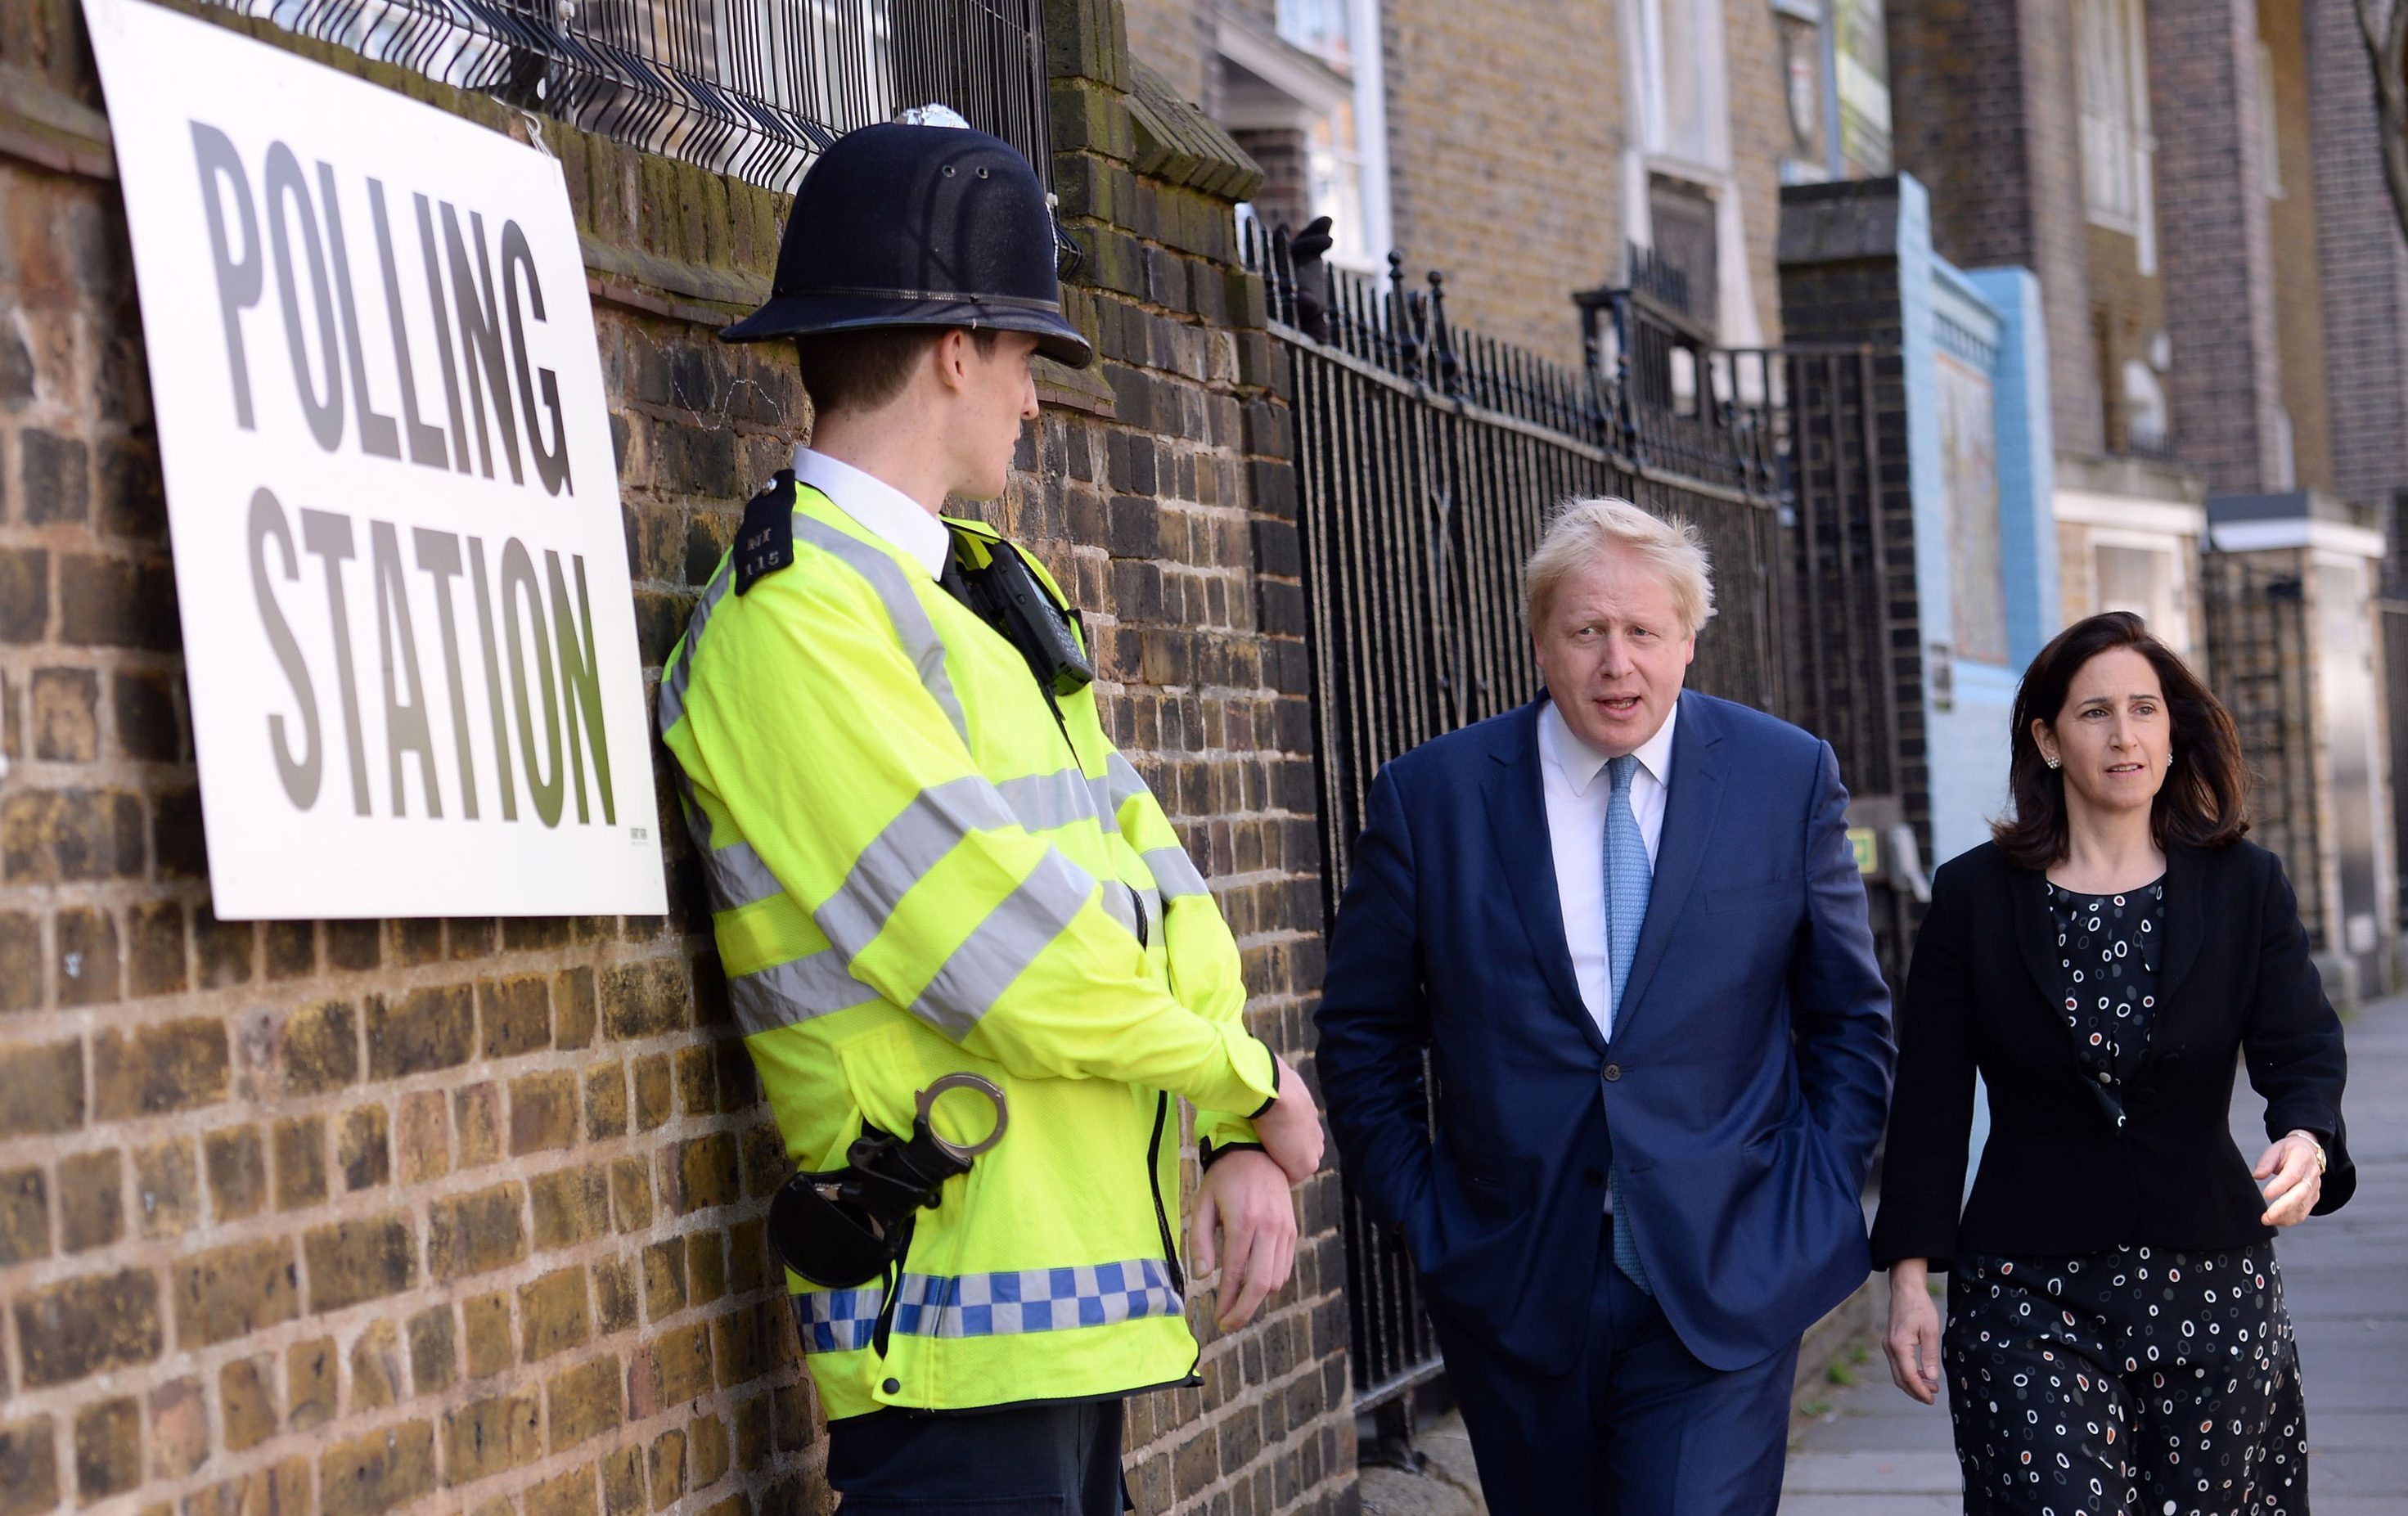 Outgoing London mayor Boris Johnson and wife Marina arrive to cast their votes in London on Thursday.